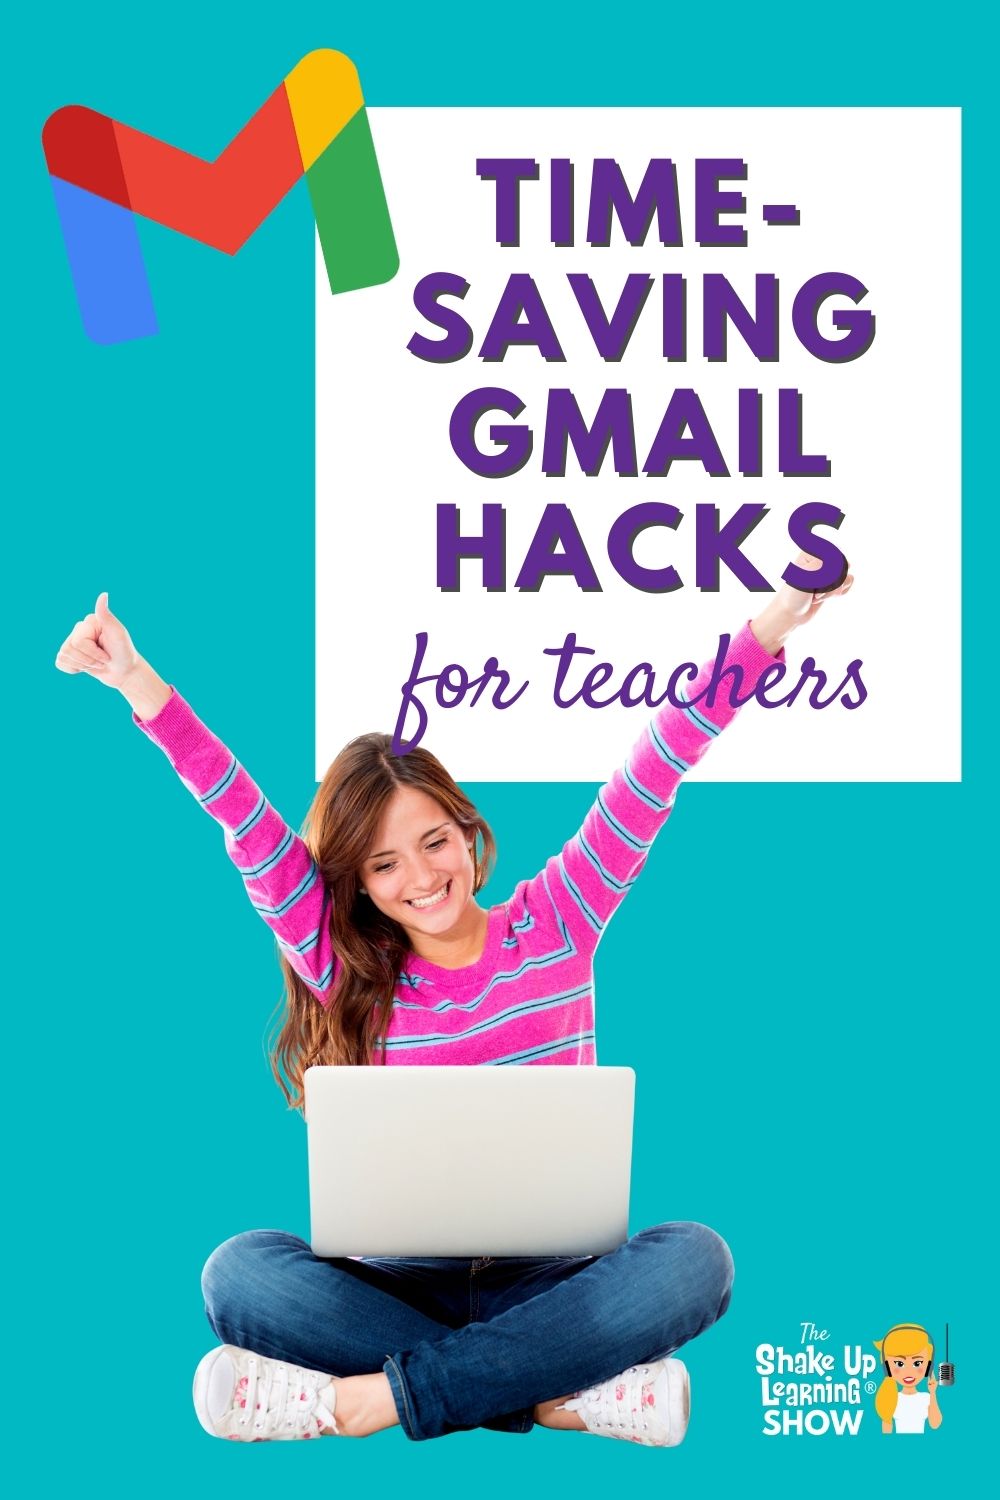 In this episode, Kasey shares her favorite Gmail hacks and features to help teachers save time and make the most of this robust tool. Let's get organized, save time and frustration, manage annoying emails, and get to what's important.